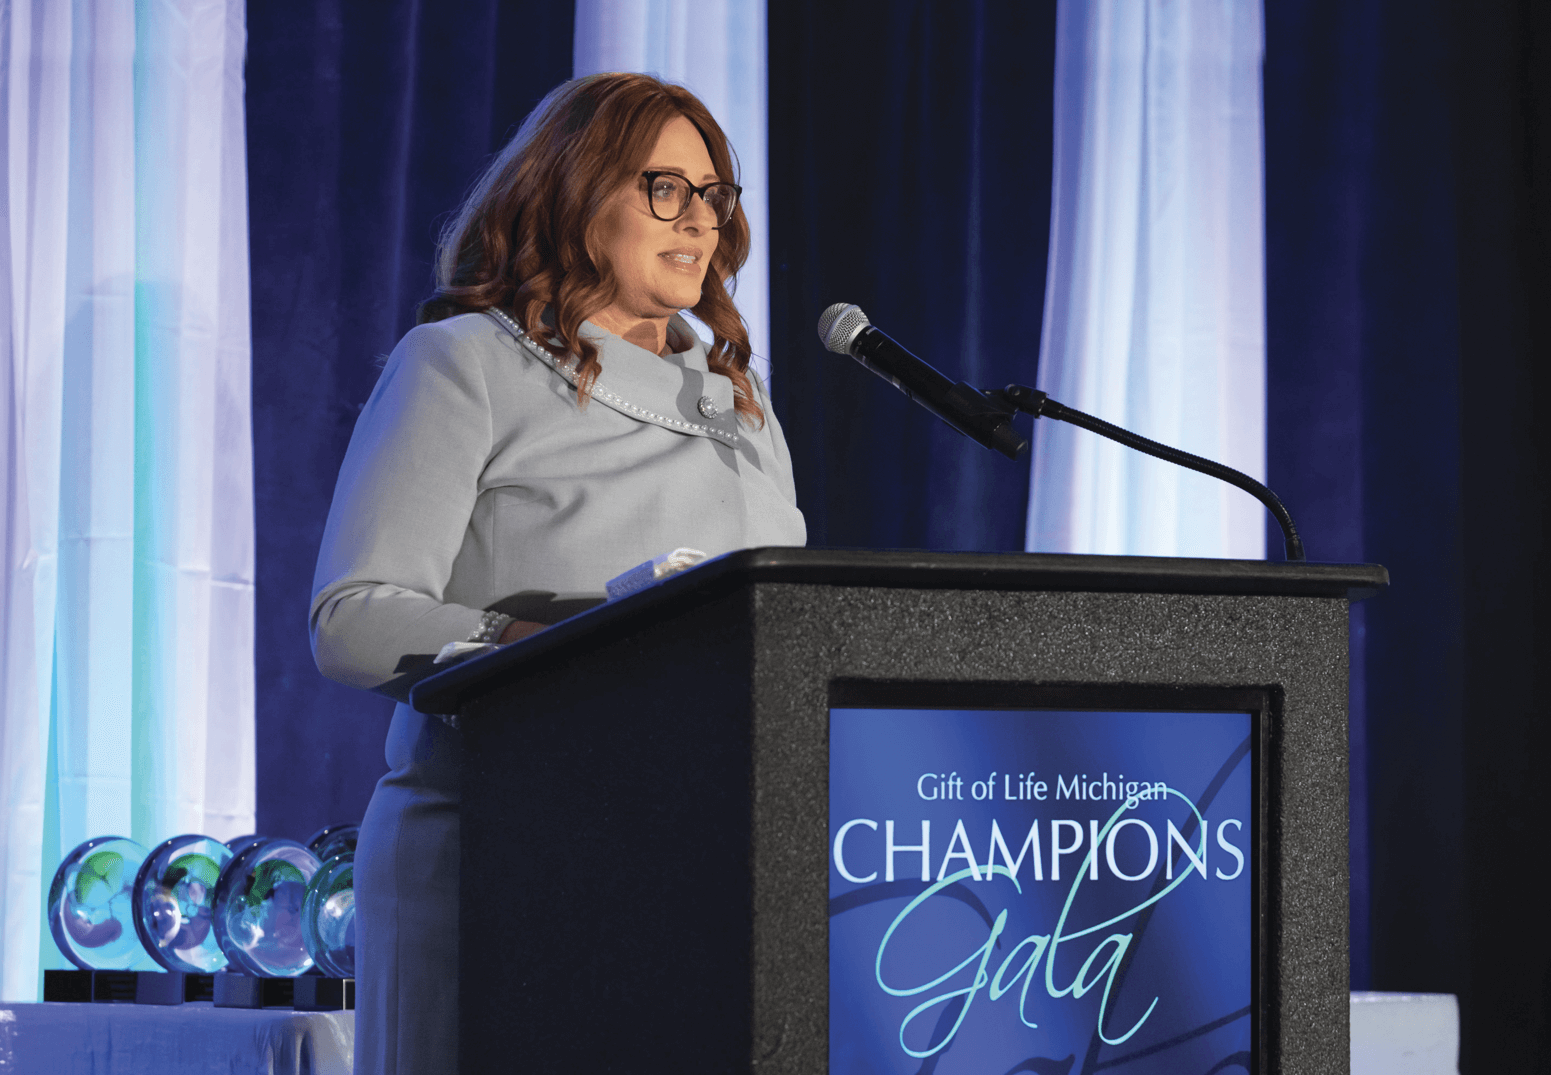 Gift of Life President and CEO Dorrie Dils at the podium during a Champions Gala